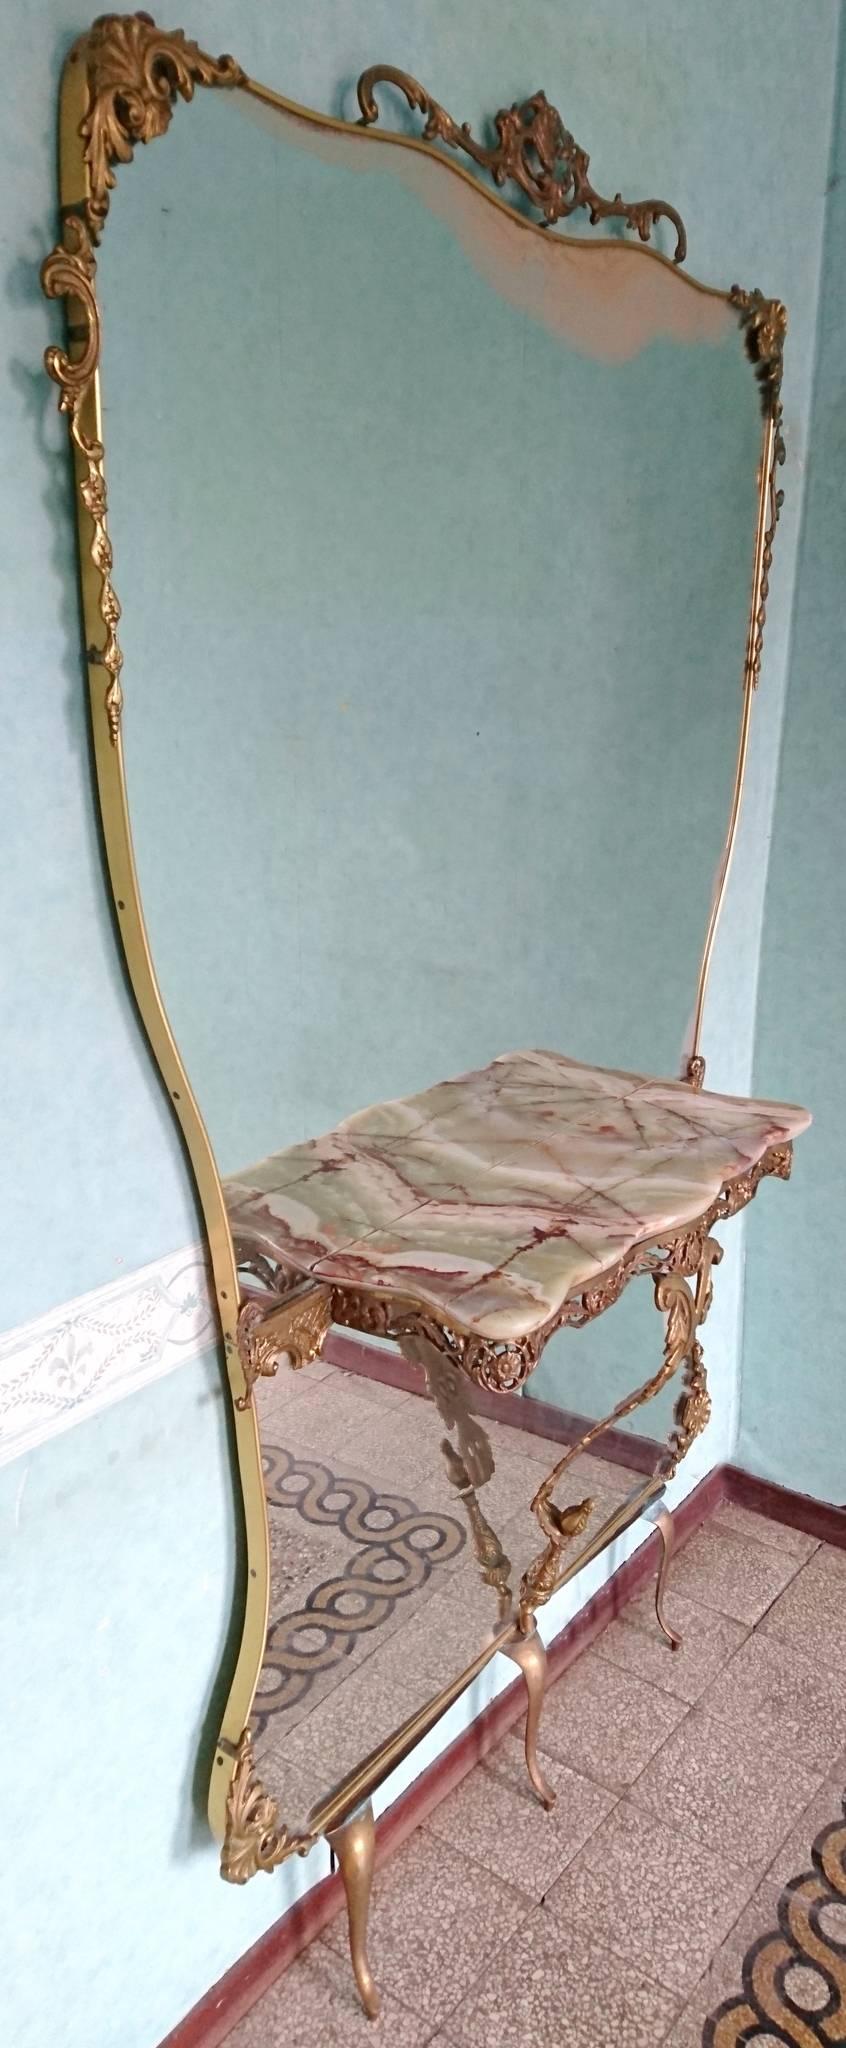 Console mirror made for the hallway or entrance. The mirror and details are in brass and the console is made of onyx in a Rococo Revival style, popular in Italy during the 1950s.